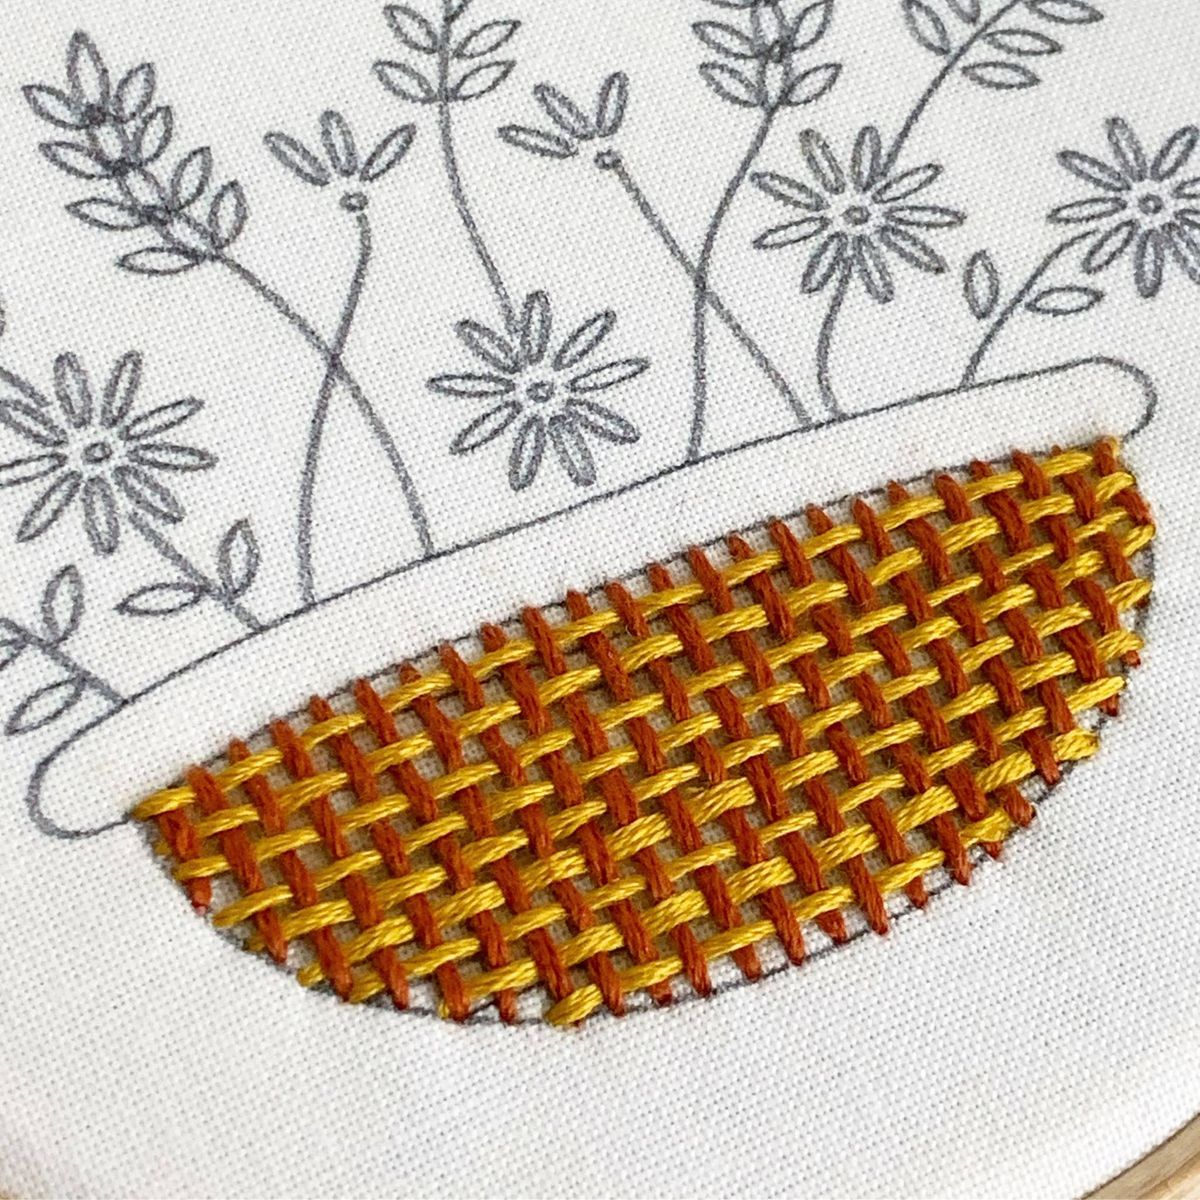 Embroidery Foundations 7: Woven Stitches with Laura Tandeske